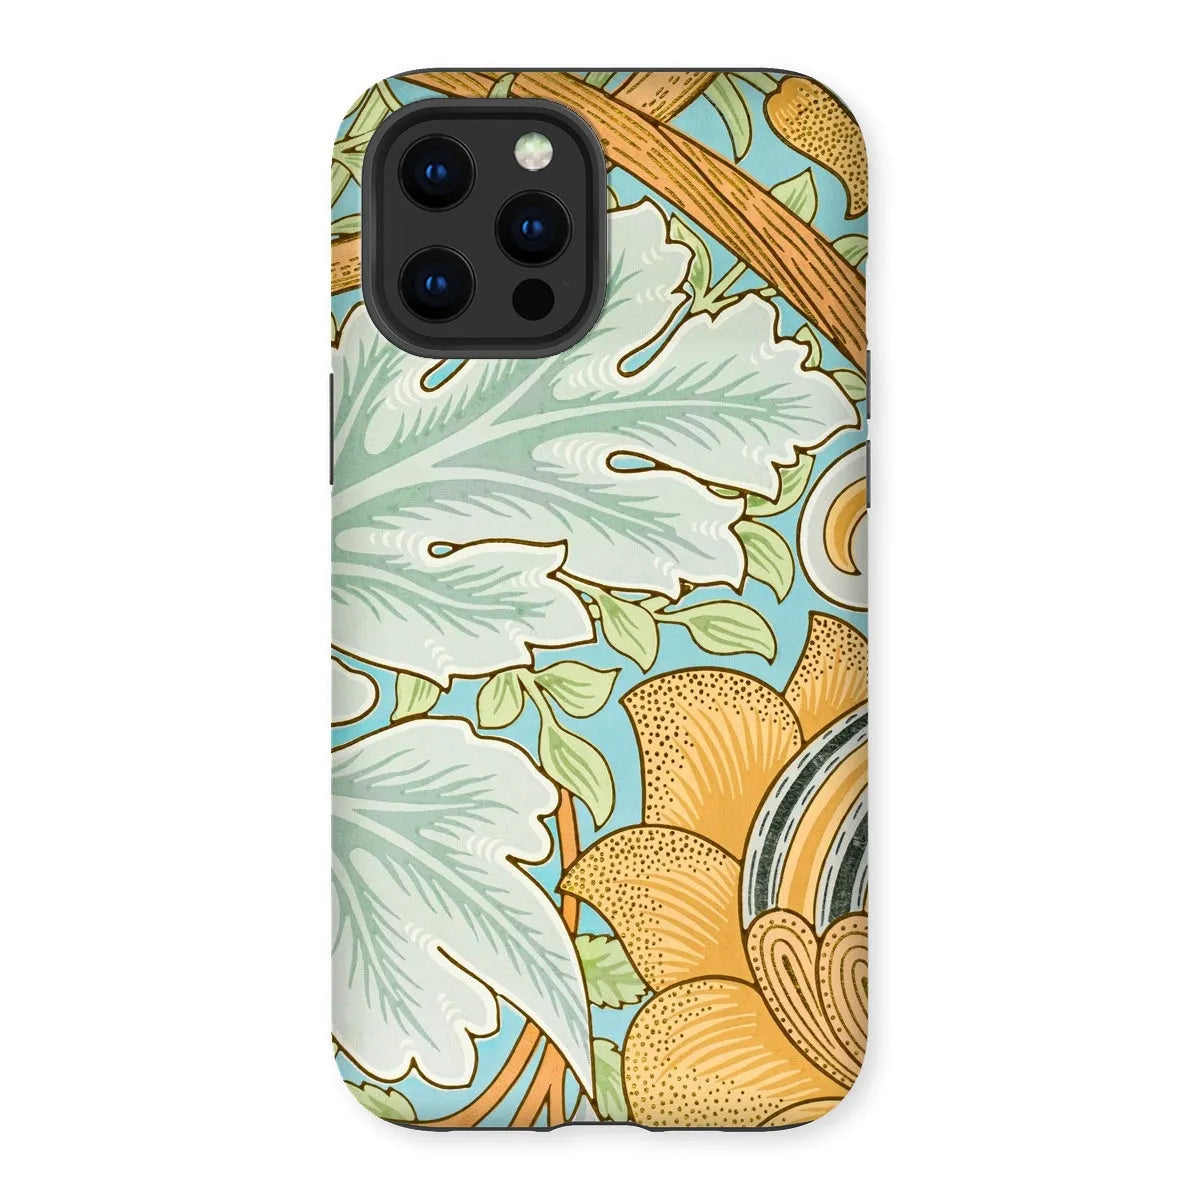 St. James - Arts And Crafts Phone Case - William Morris - Iphone 12 Pro Max / Matte - Mobile Phone Cases - Aesthetic Art